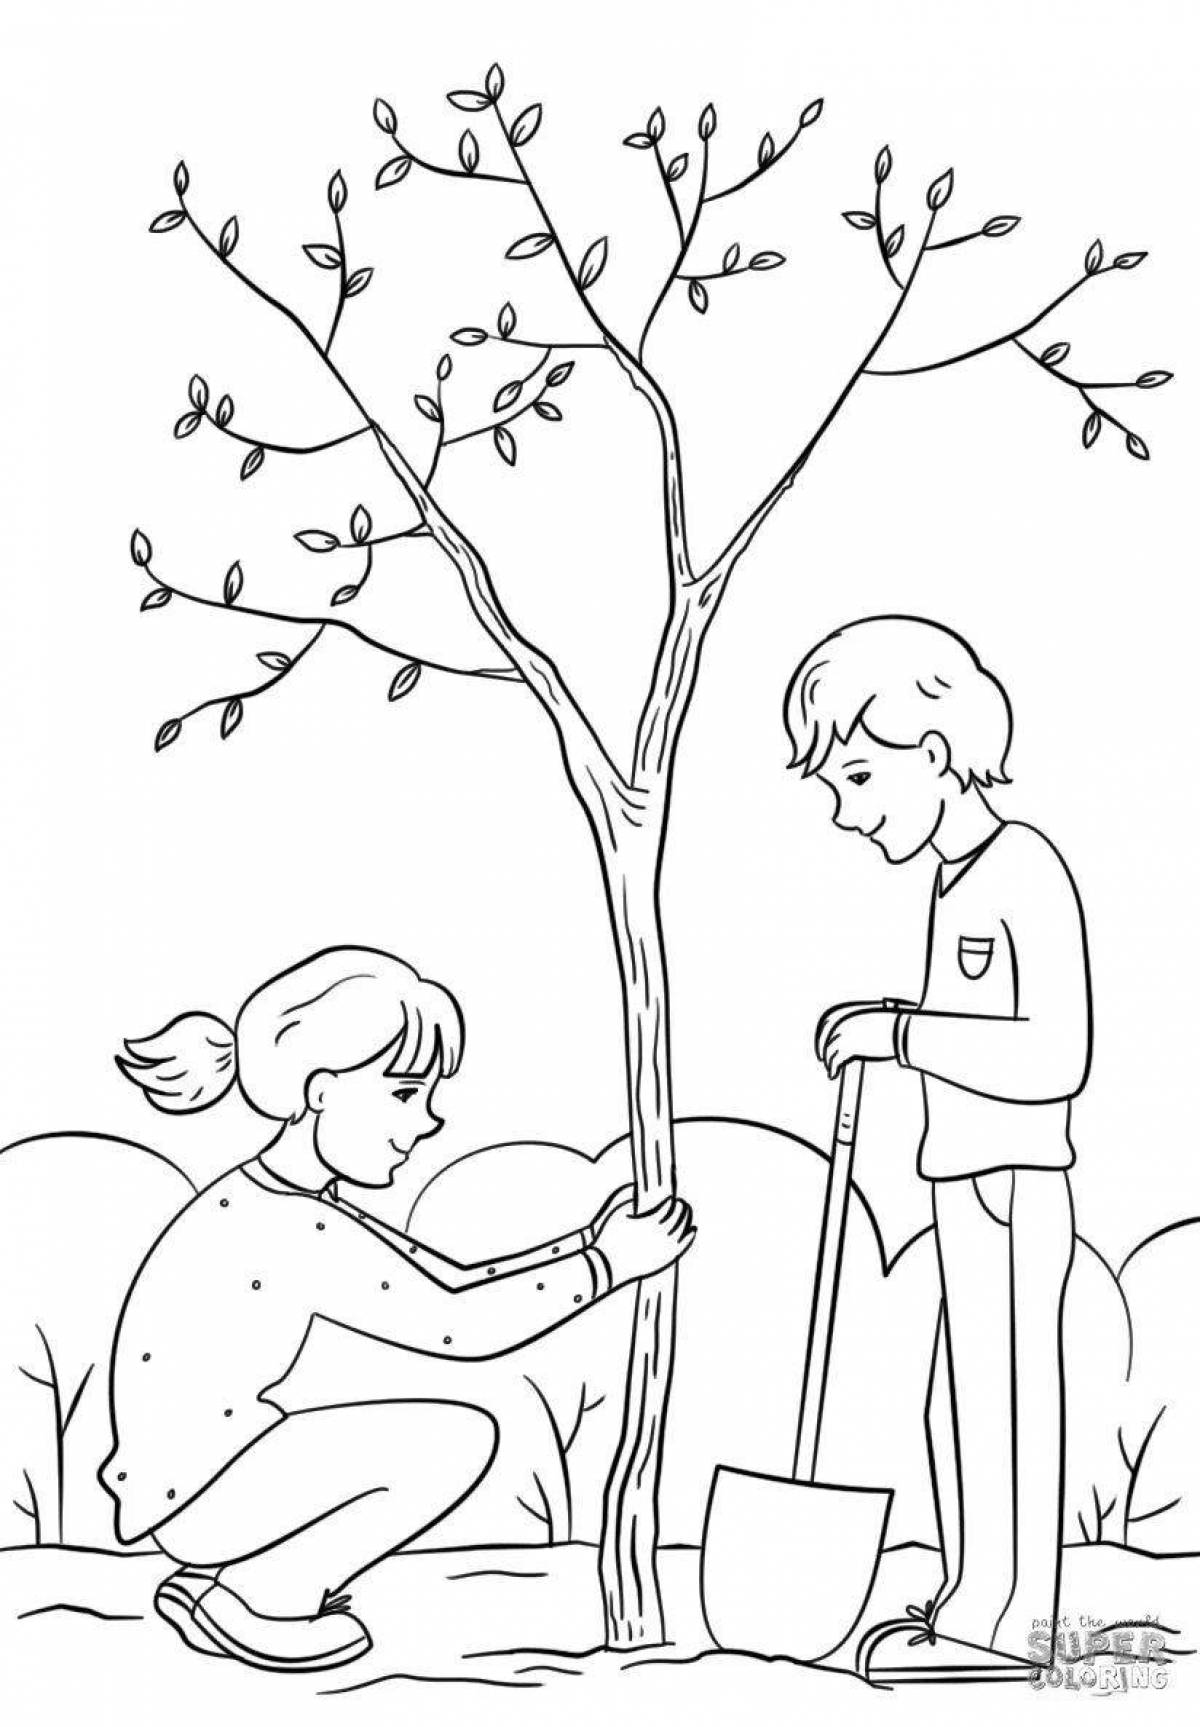 Good deeds shiny coloring page